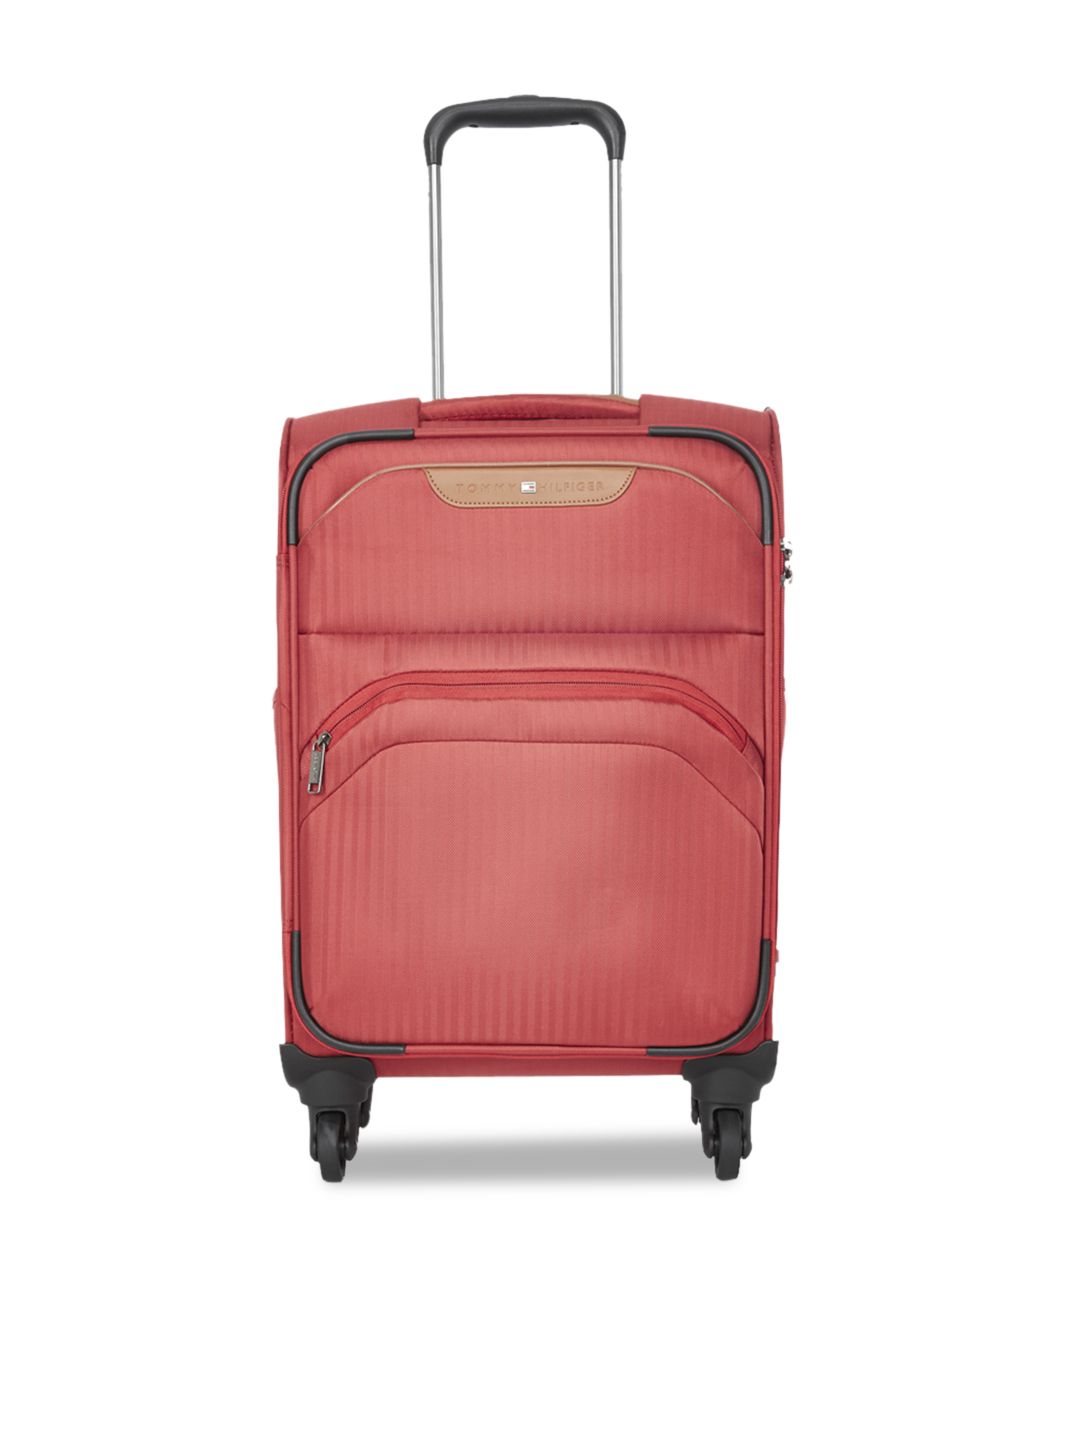 Tommy Hilfiger Unisex Red Solid Soft-Sided 360-Degree Rotation Cabin Trolley Suitcase Price in India